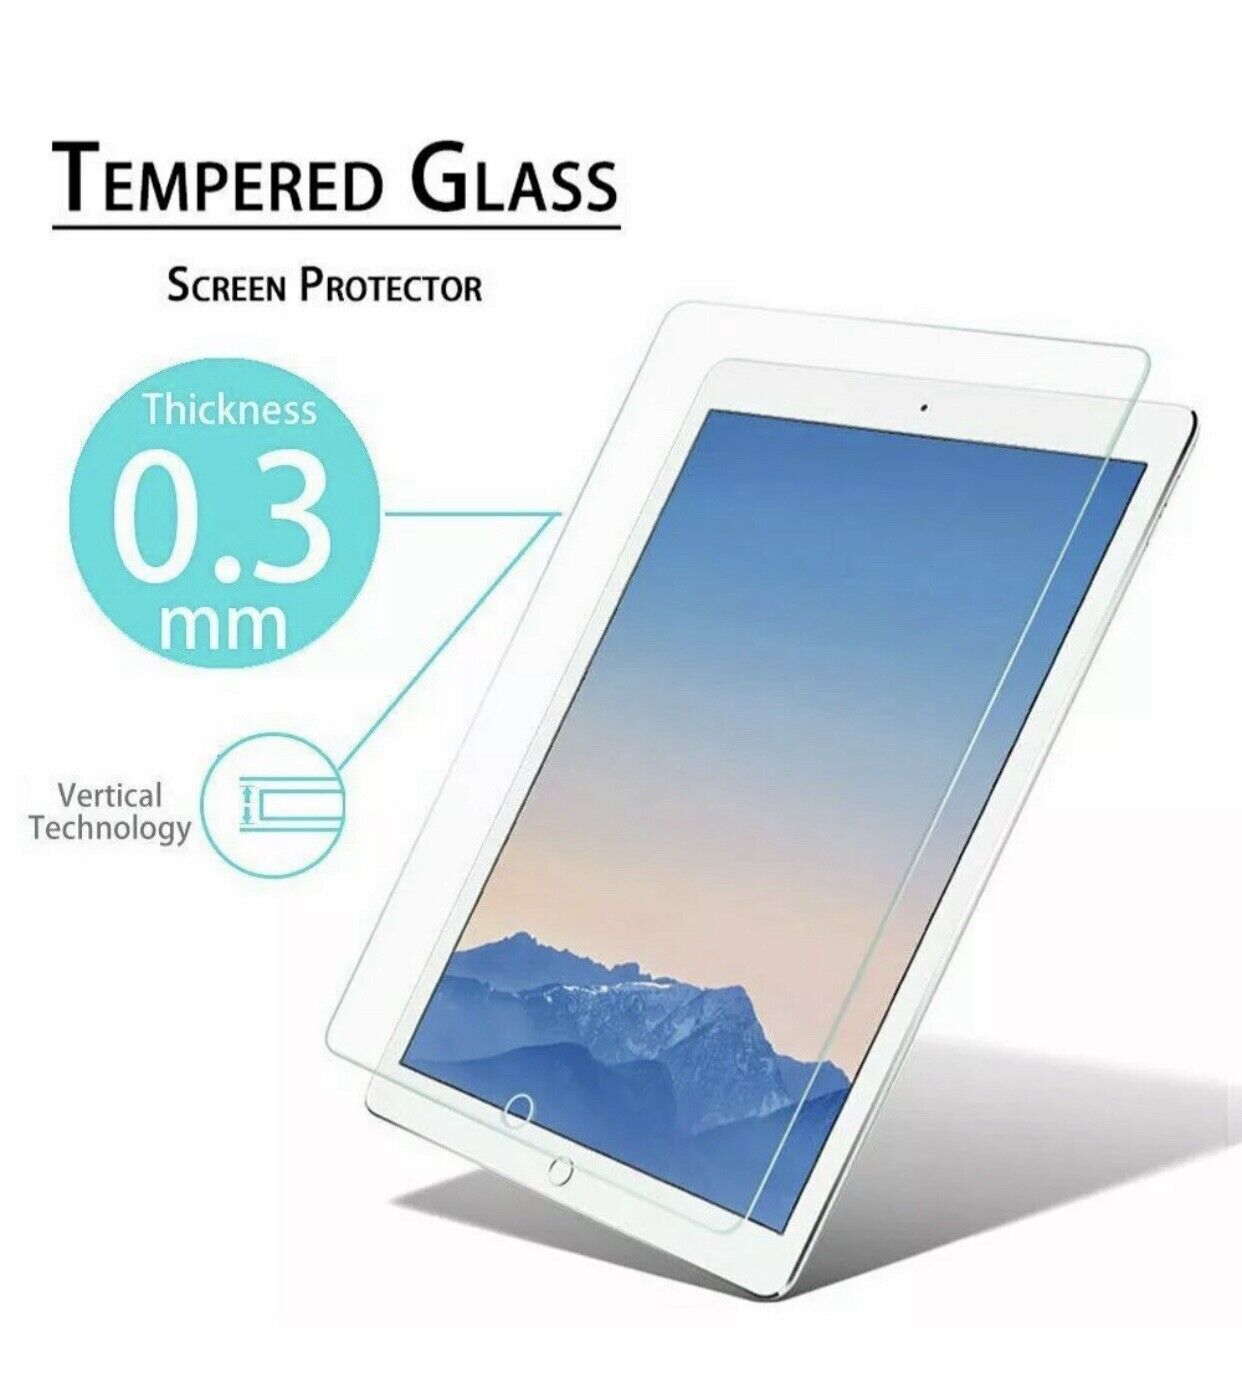 5x Tempered Glass Screen Protector Cover For iPad 10.2 inch 2019 7th Generation Unbranded Does Not Apply - фотография #3